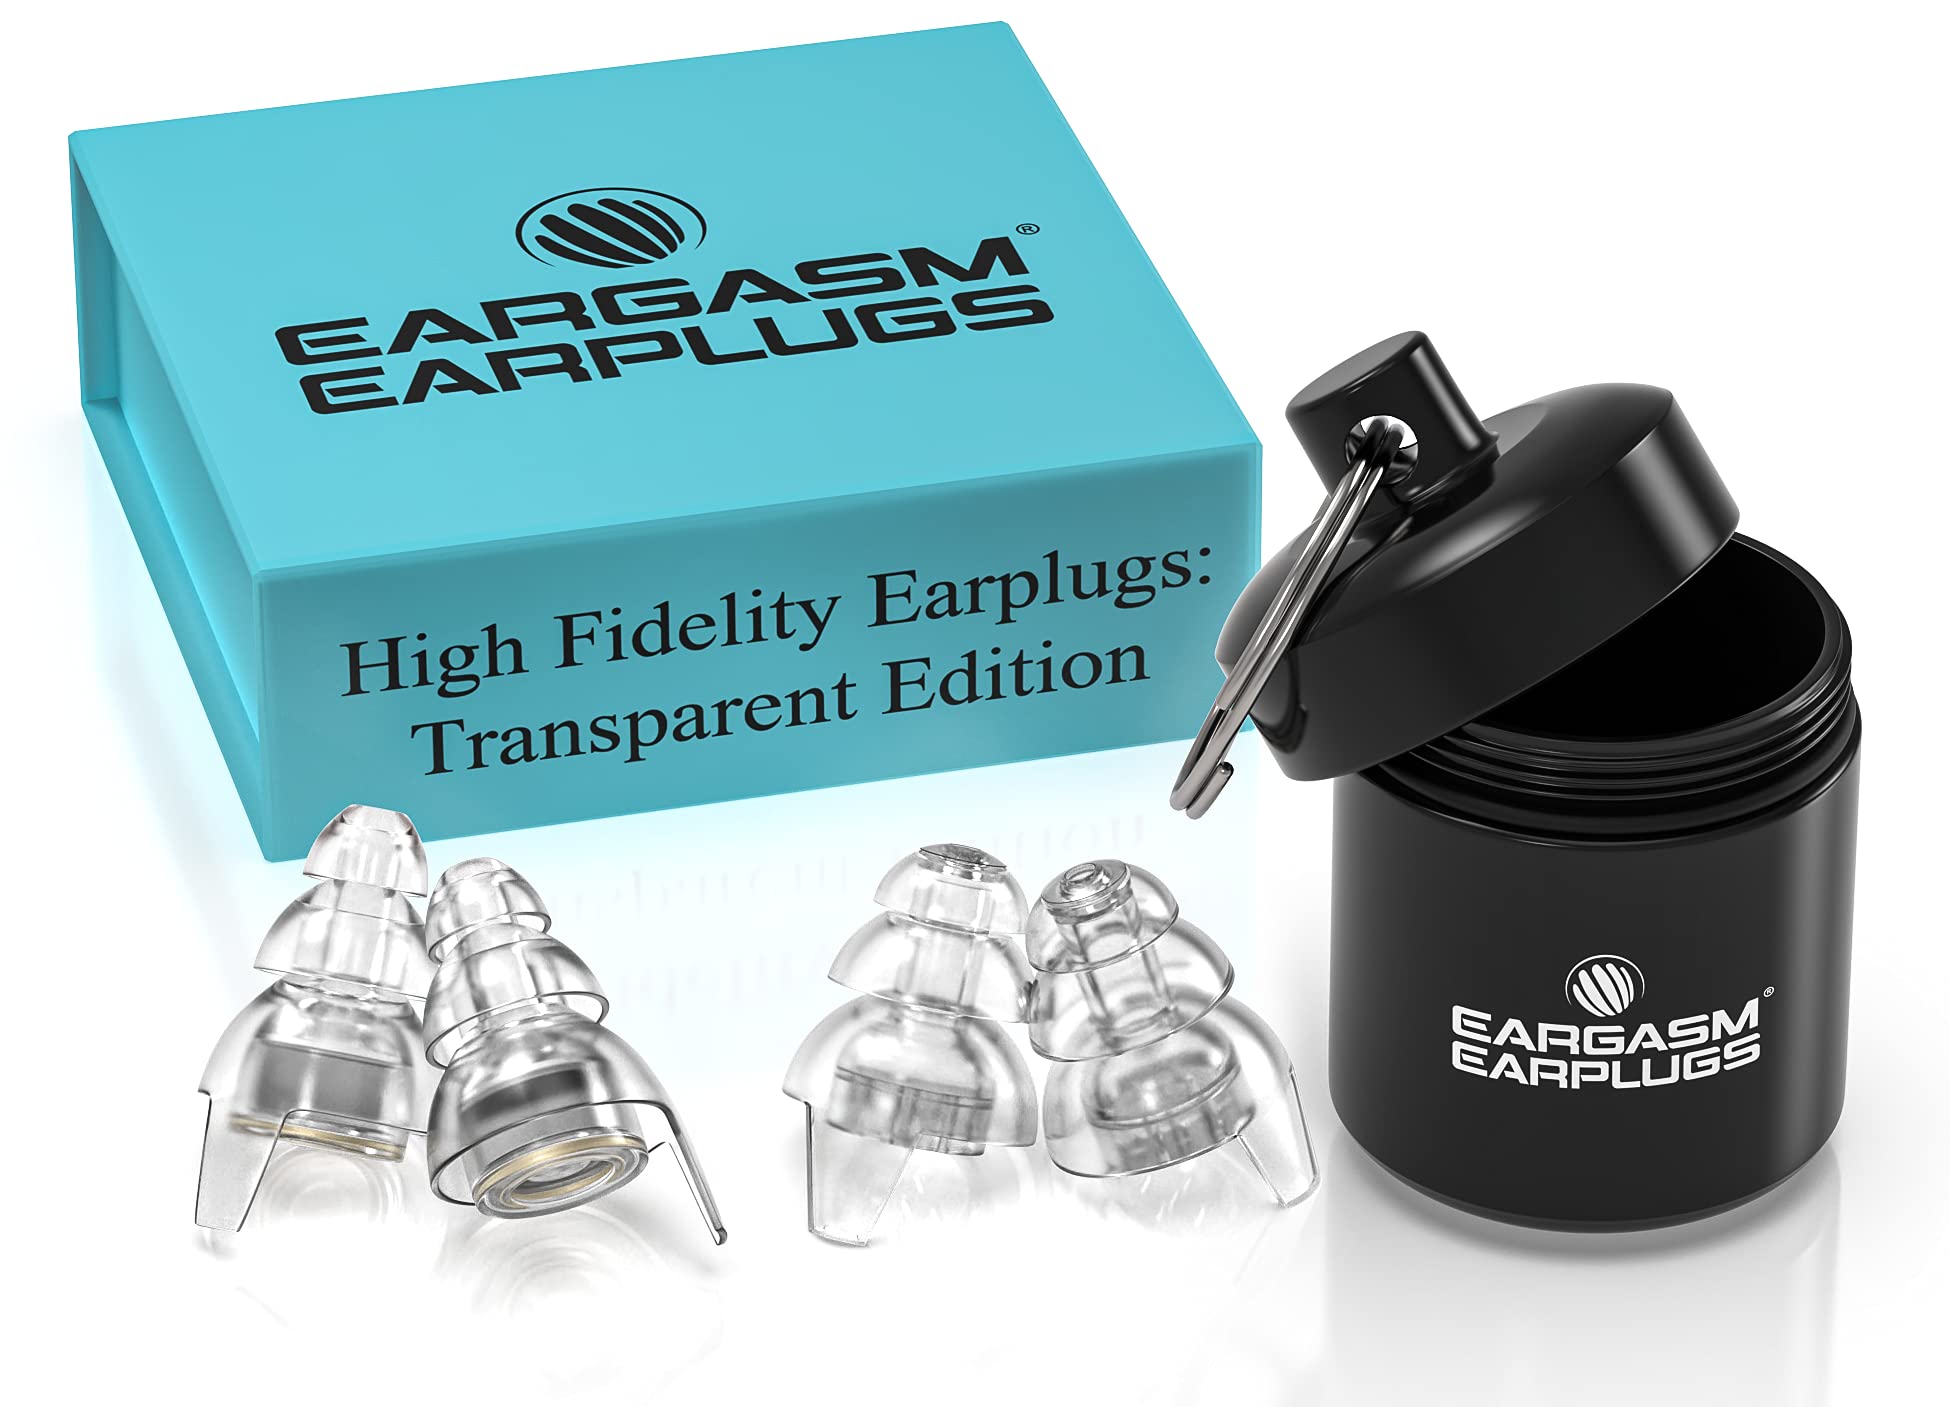 Eargasm High Fidelity & Smaller Ears Transparent Edition: Earplugs for Concerts, Musicians, Noise Sensitivity and More